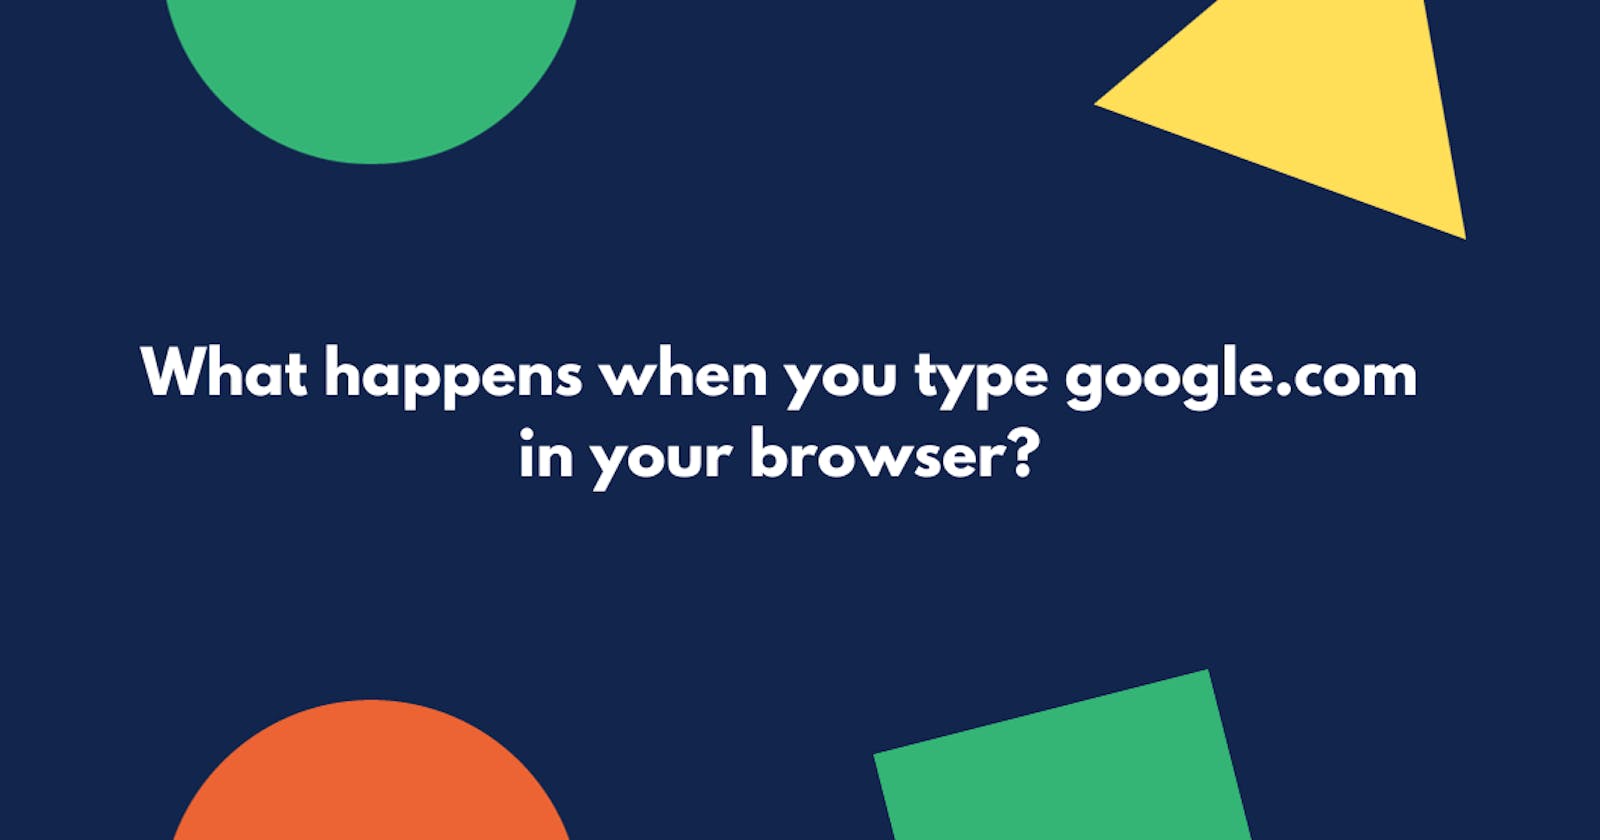 What happens when you type google.com in your browser?